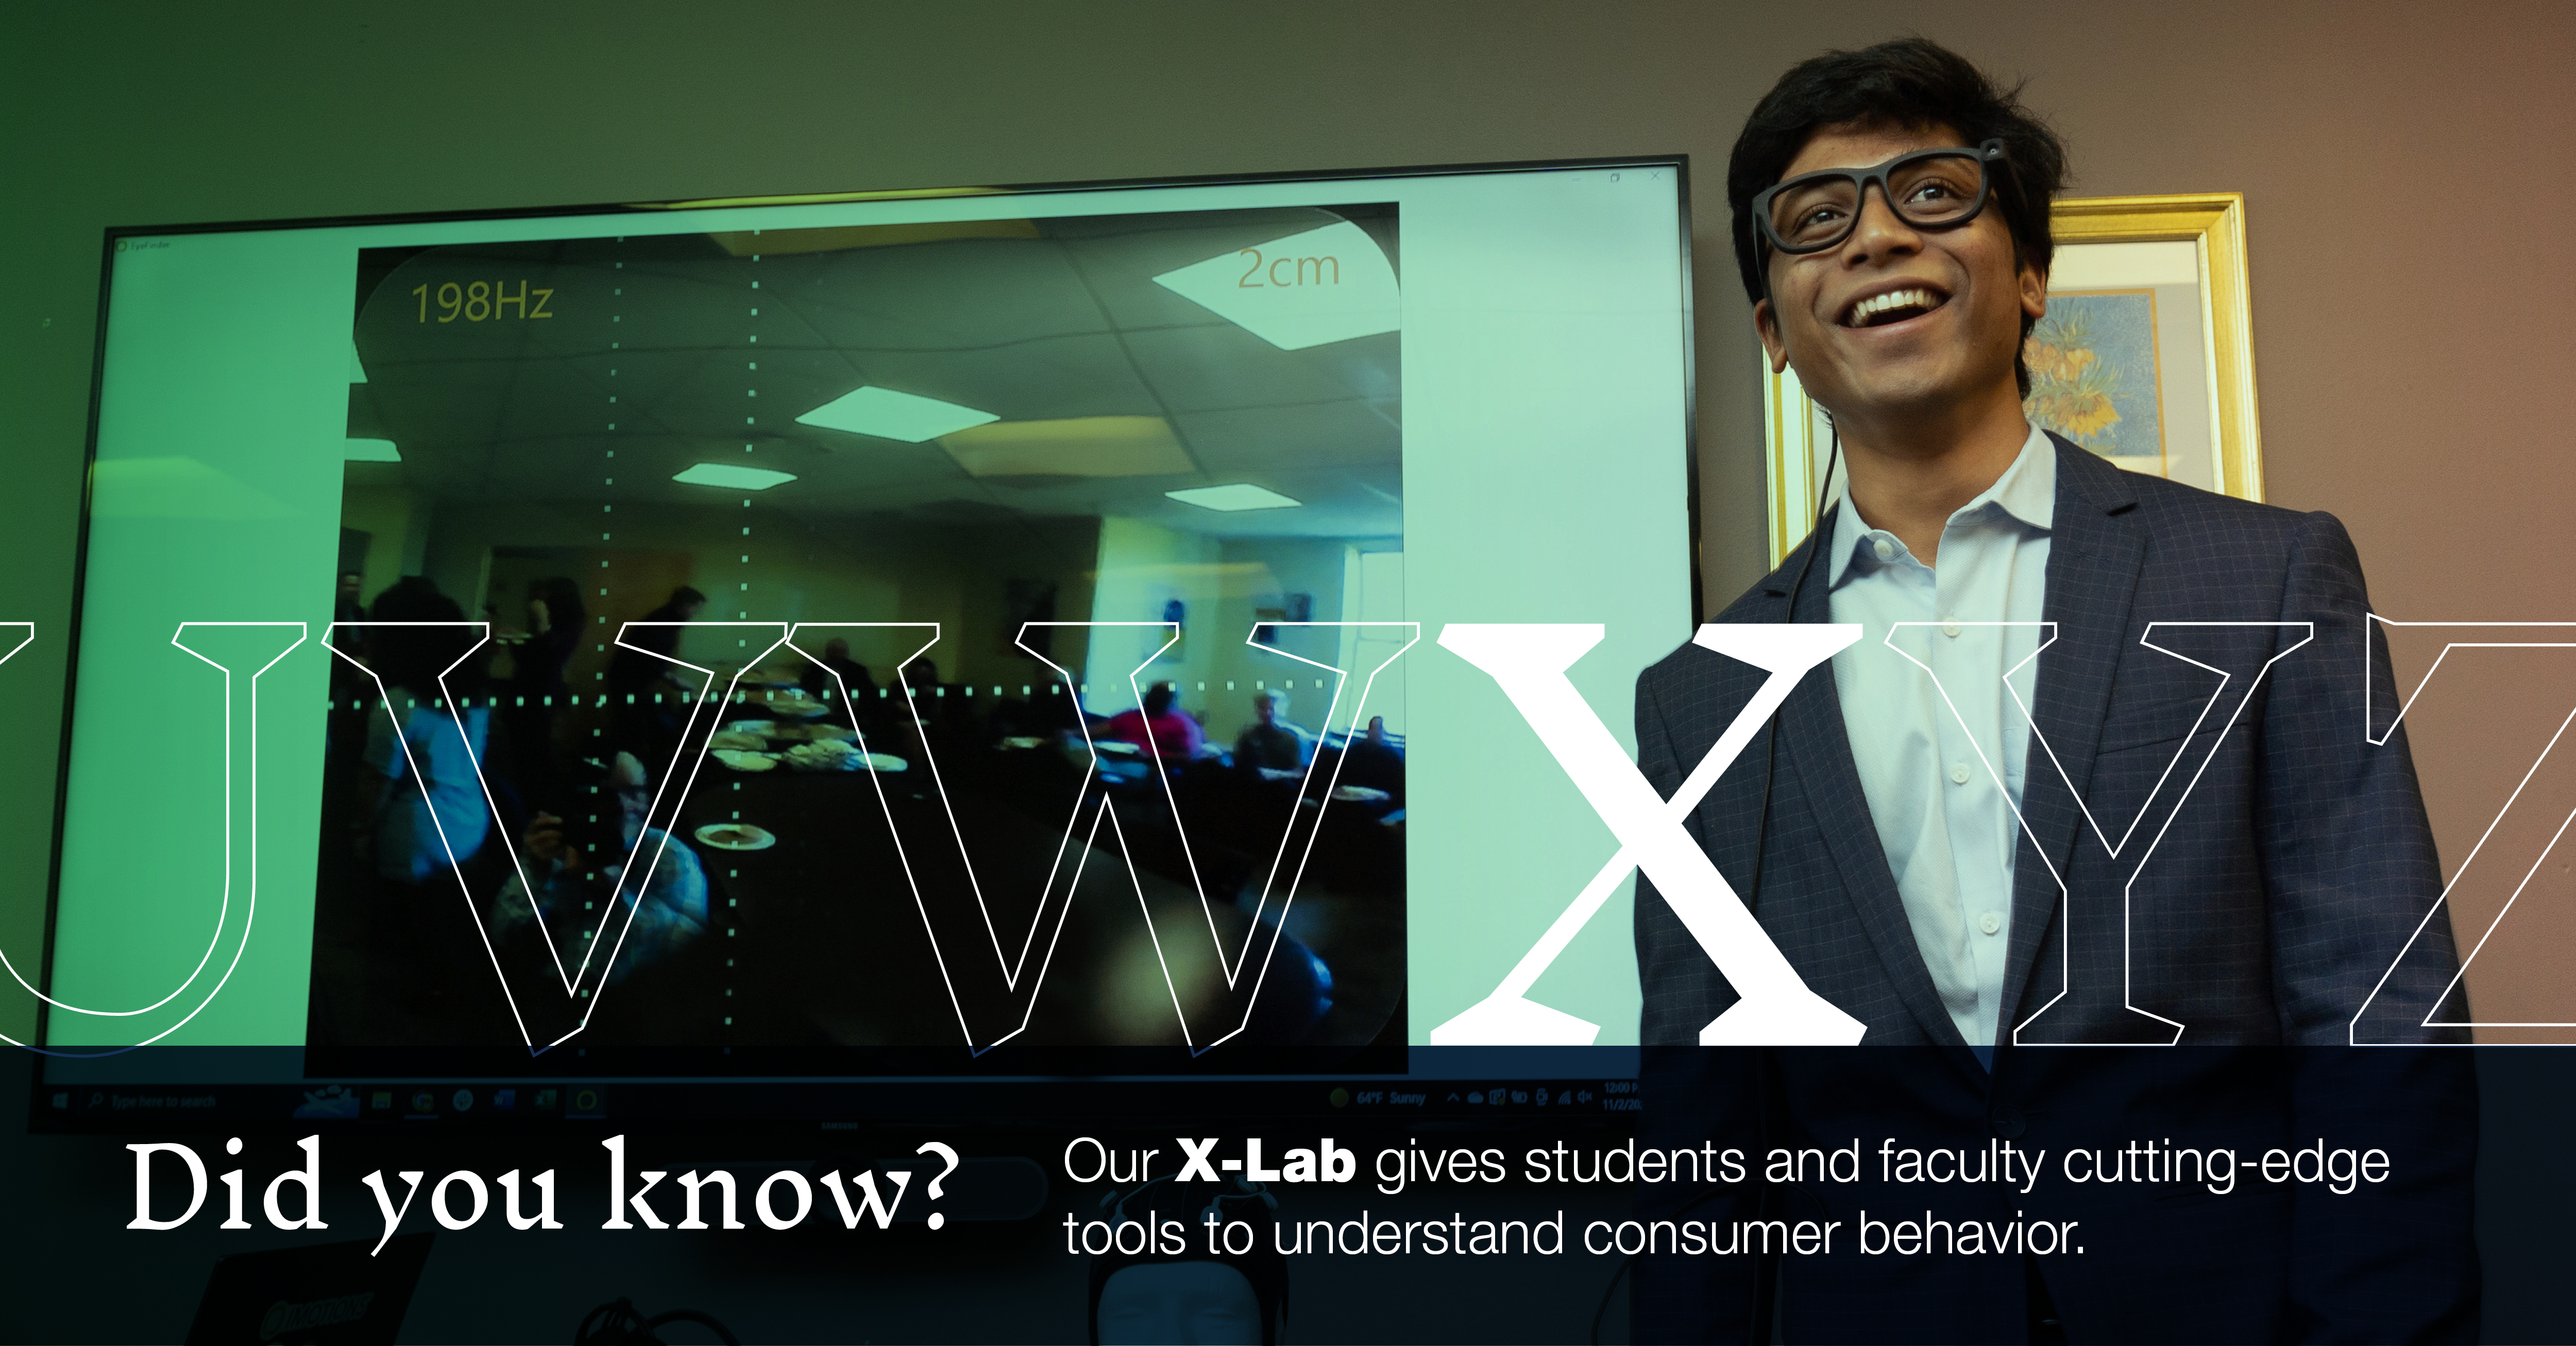 X: [image of student wearing funky glasses in our X-Lab] Did you know that our X-Lab gives students and faculty cutting-edge tools to understand consumer behavior?